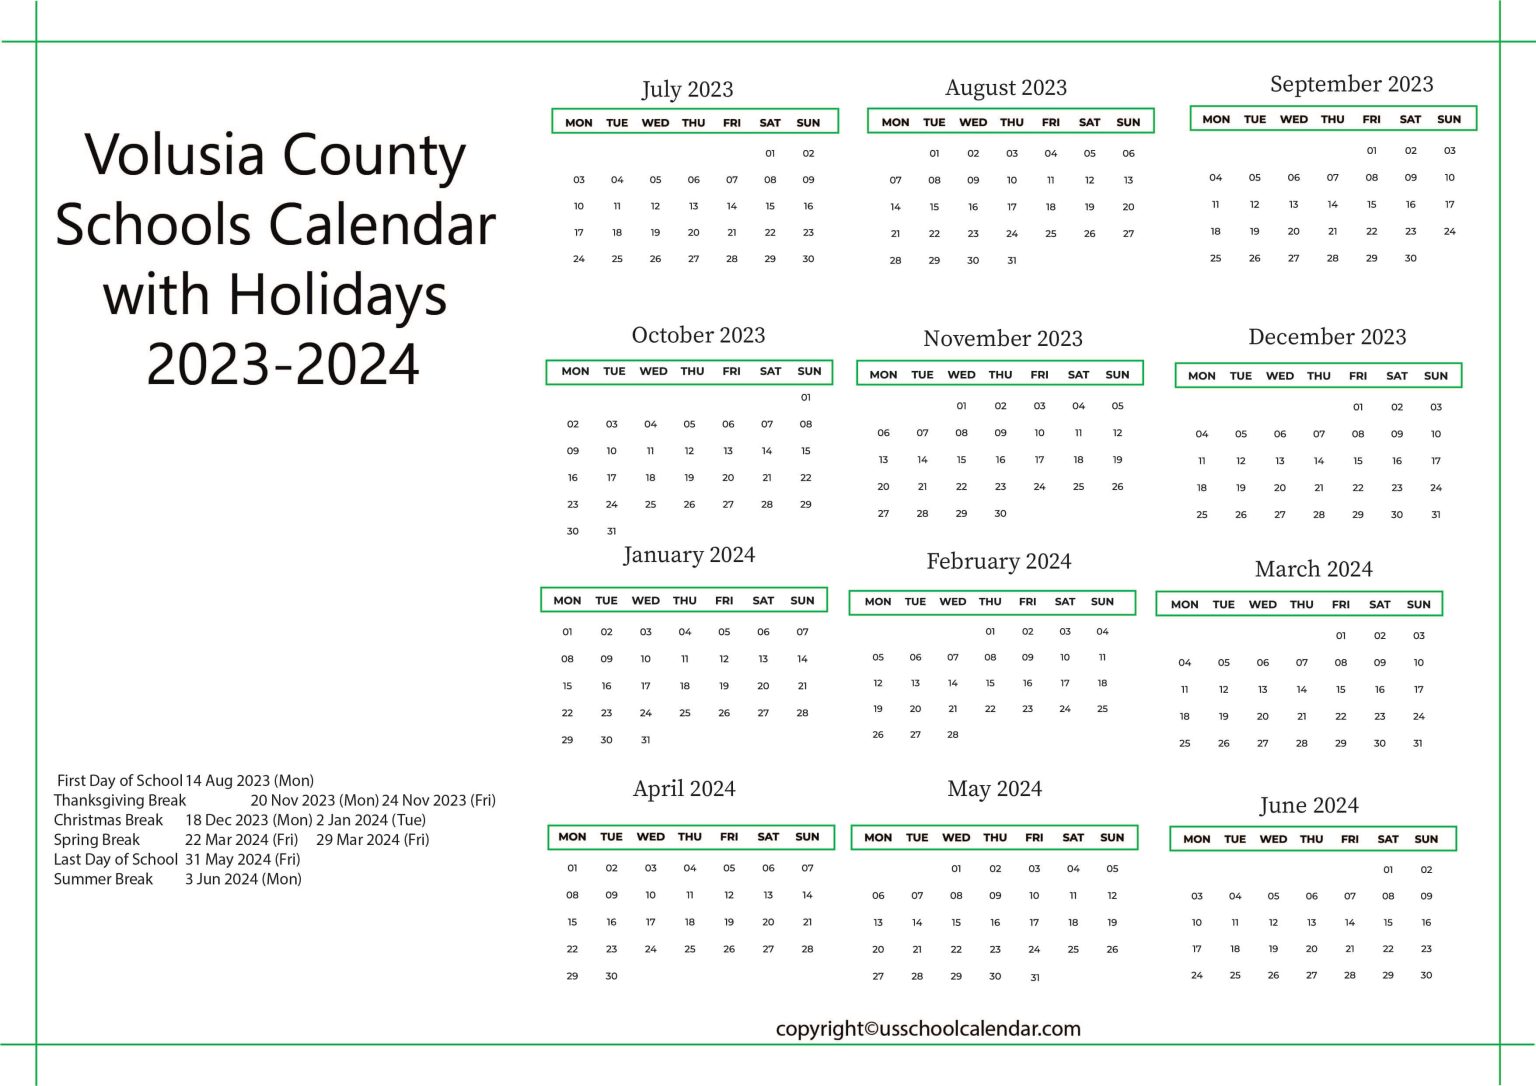 Volusia County Schools Calendar with Holidays 2023 2024